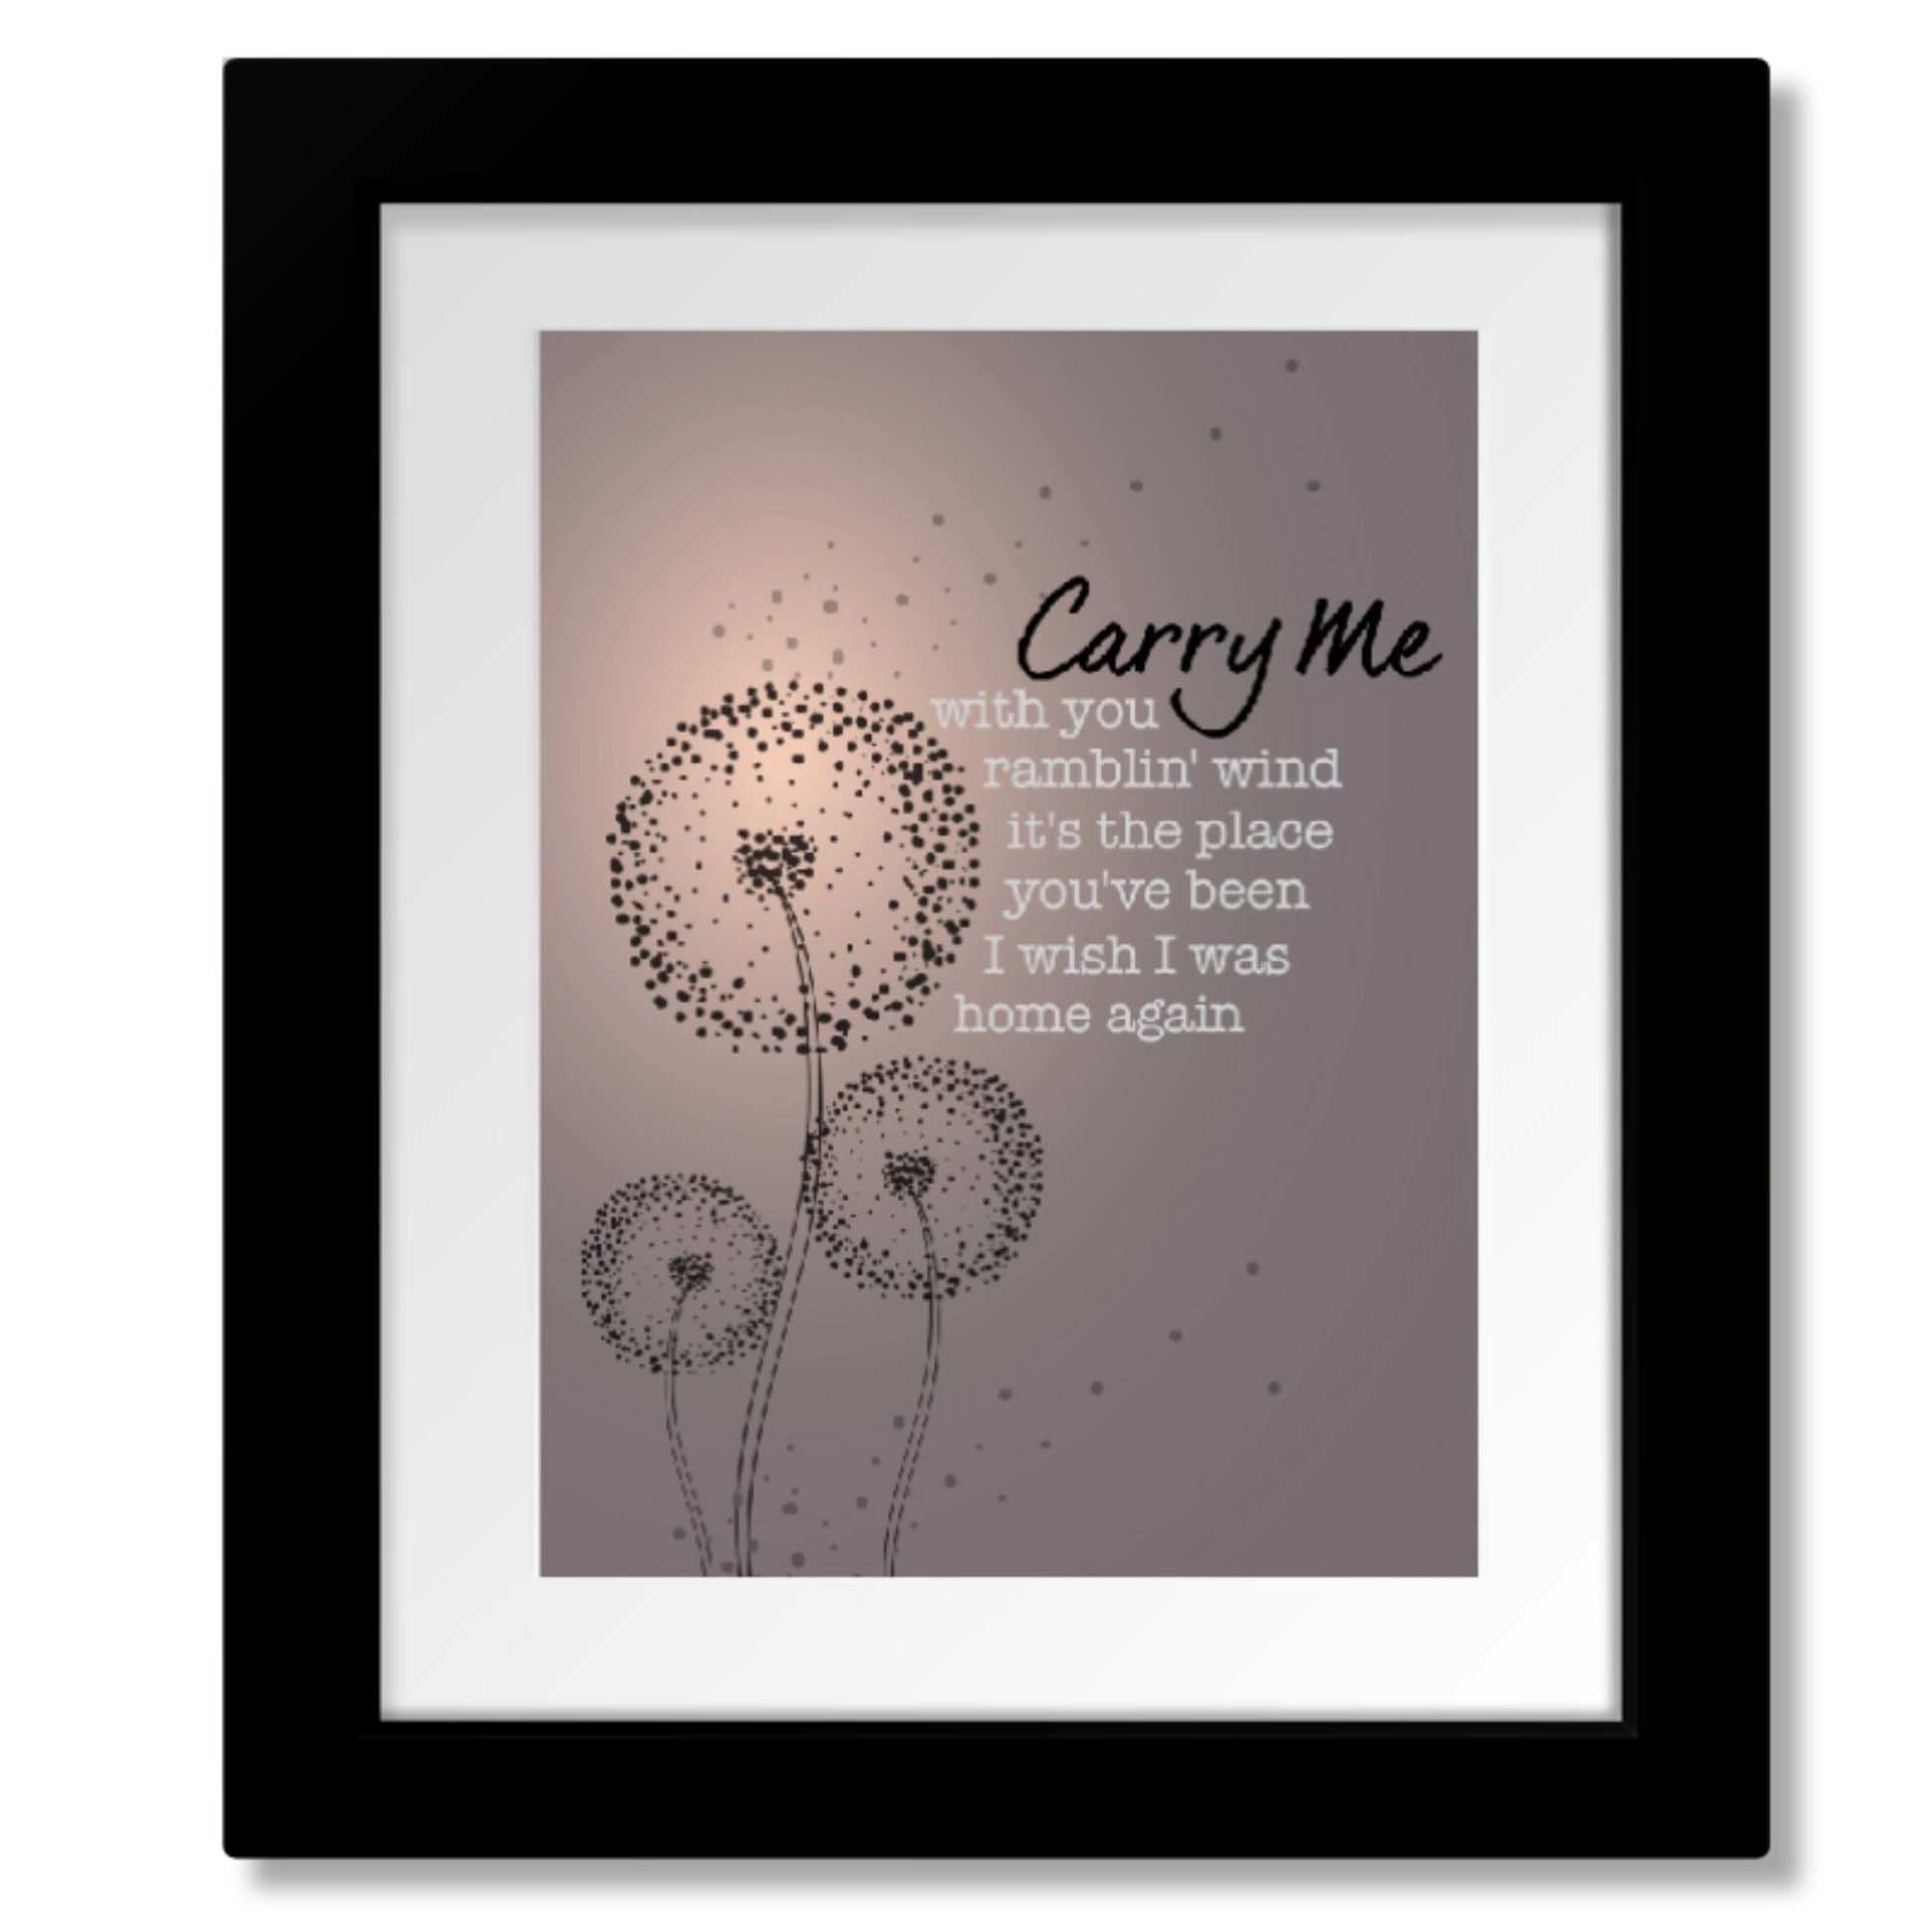 Carry Me by the Stampeders - 70s Song Lyric Wall Art Song Lyrics Art Song Lyrics Art 8x10 Framed and Matted Print 